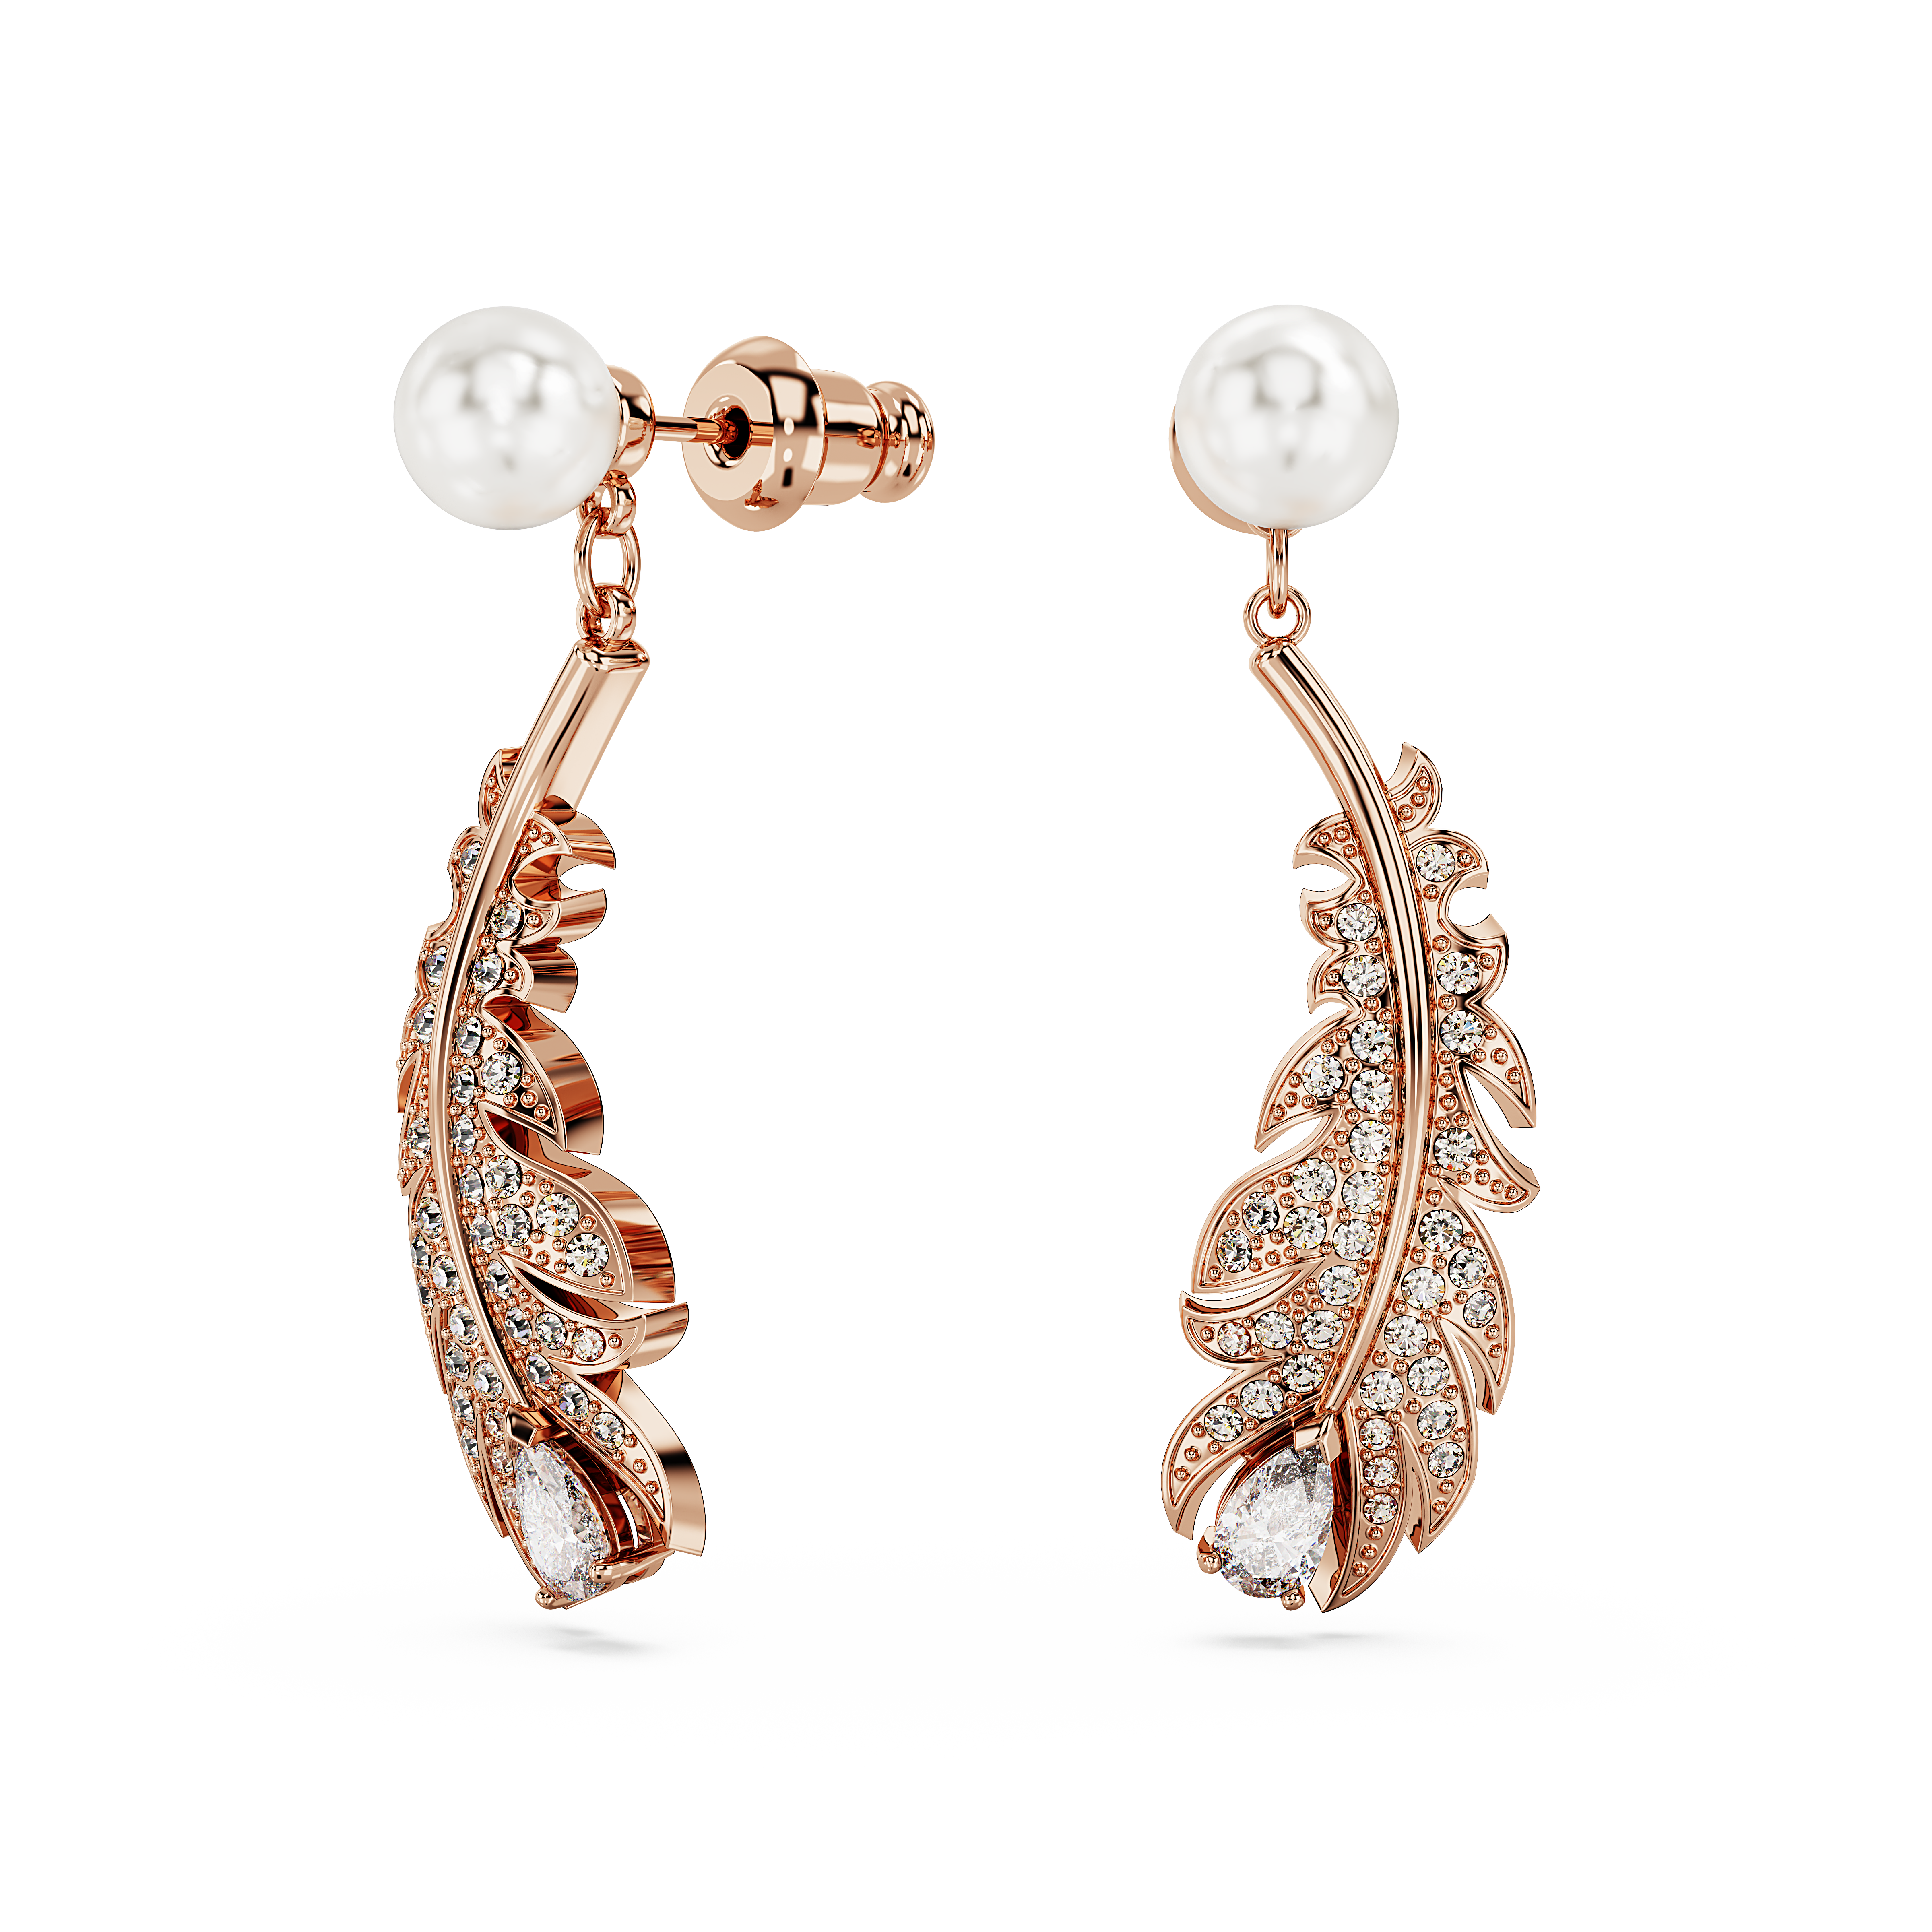 SWAROVSKI NICE DROP EARRINGS, MIXED CUTS, FEATHER, WHITE, ROSE GOLD-TONE PLATED 5663487